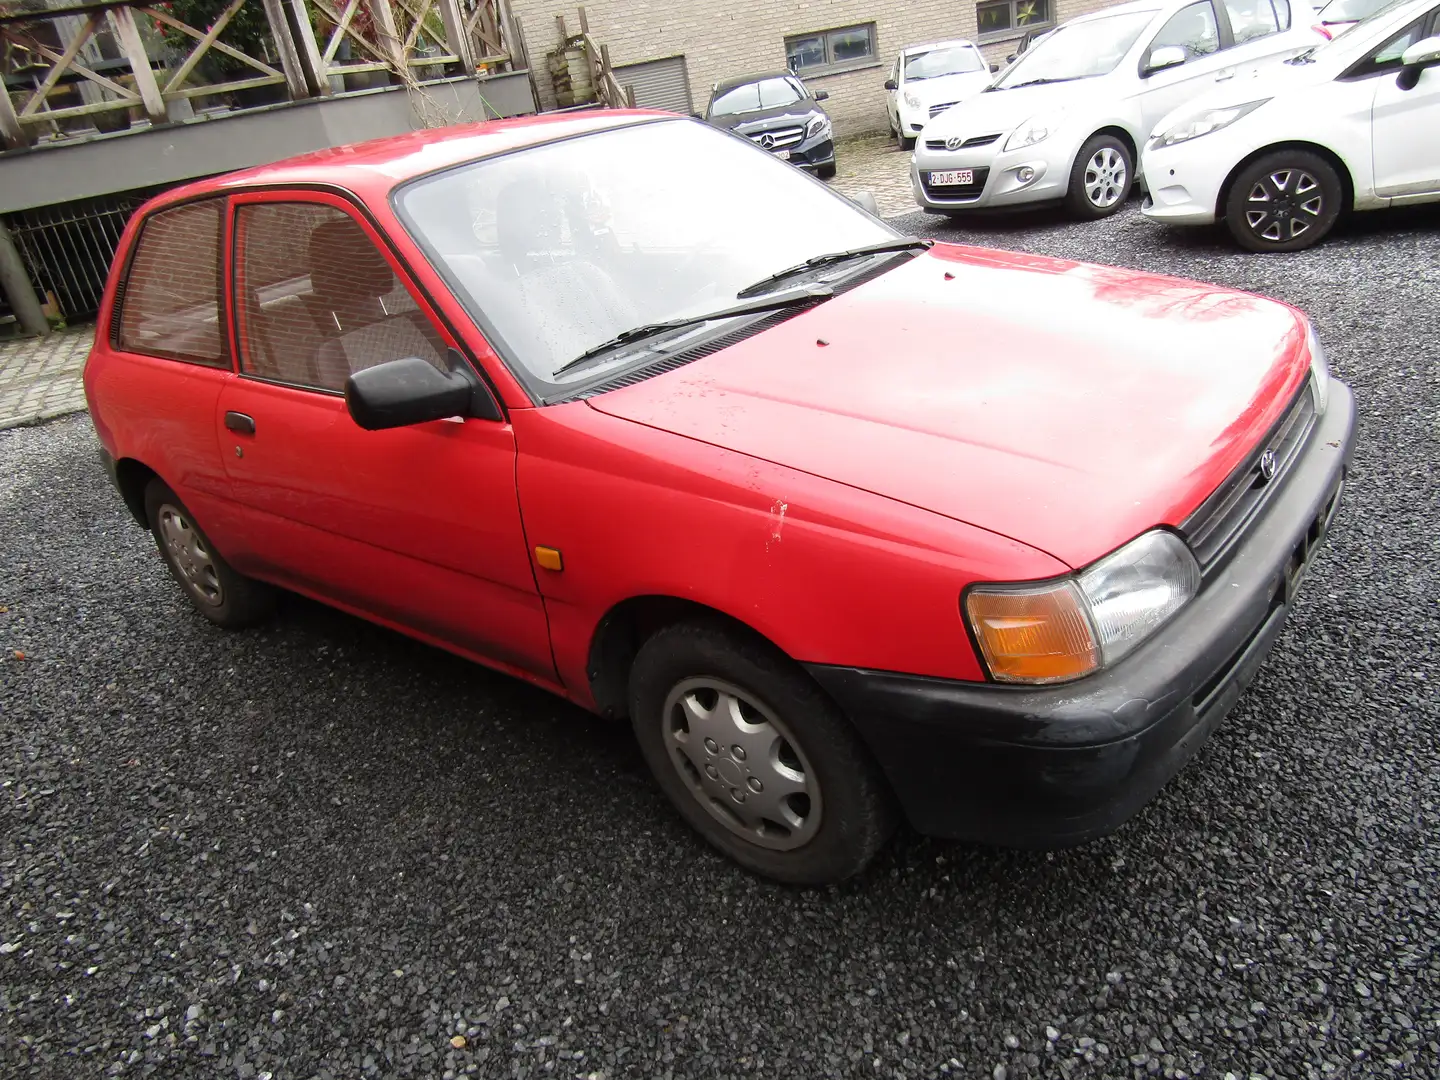 Toyota Starlet 1.0i (immatriculation ancêtre possible) 32 ans Rosso - 1